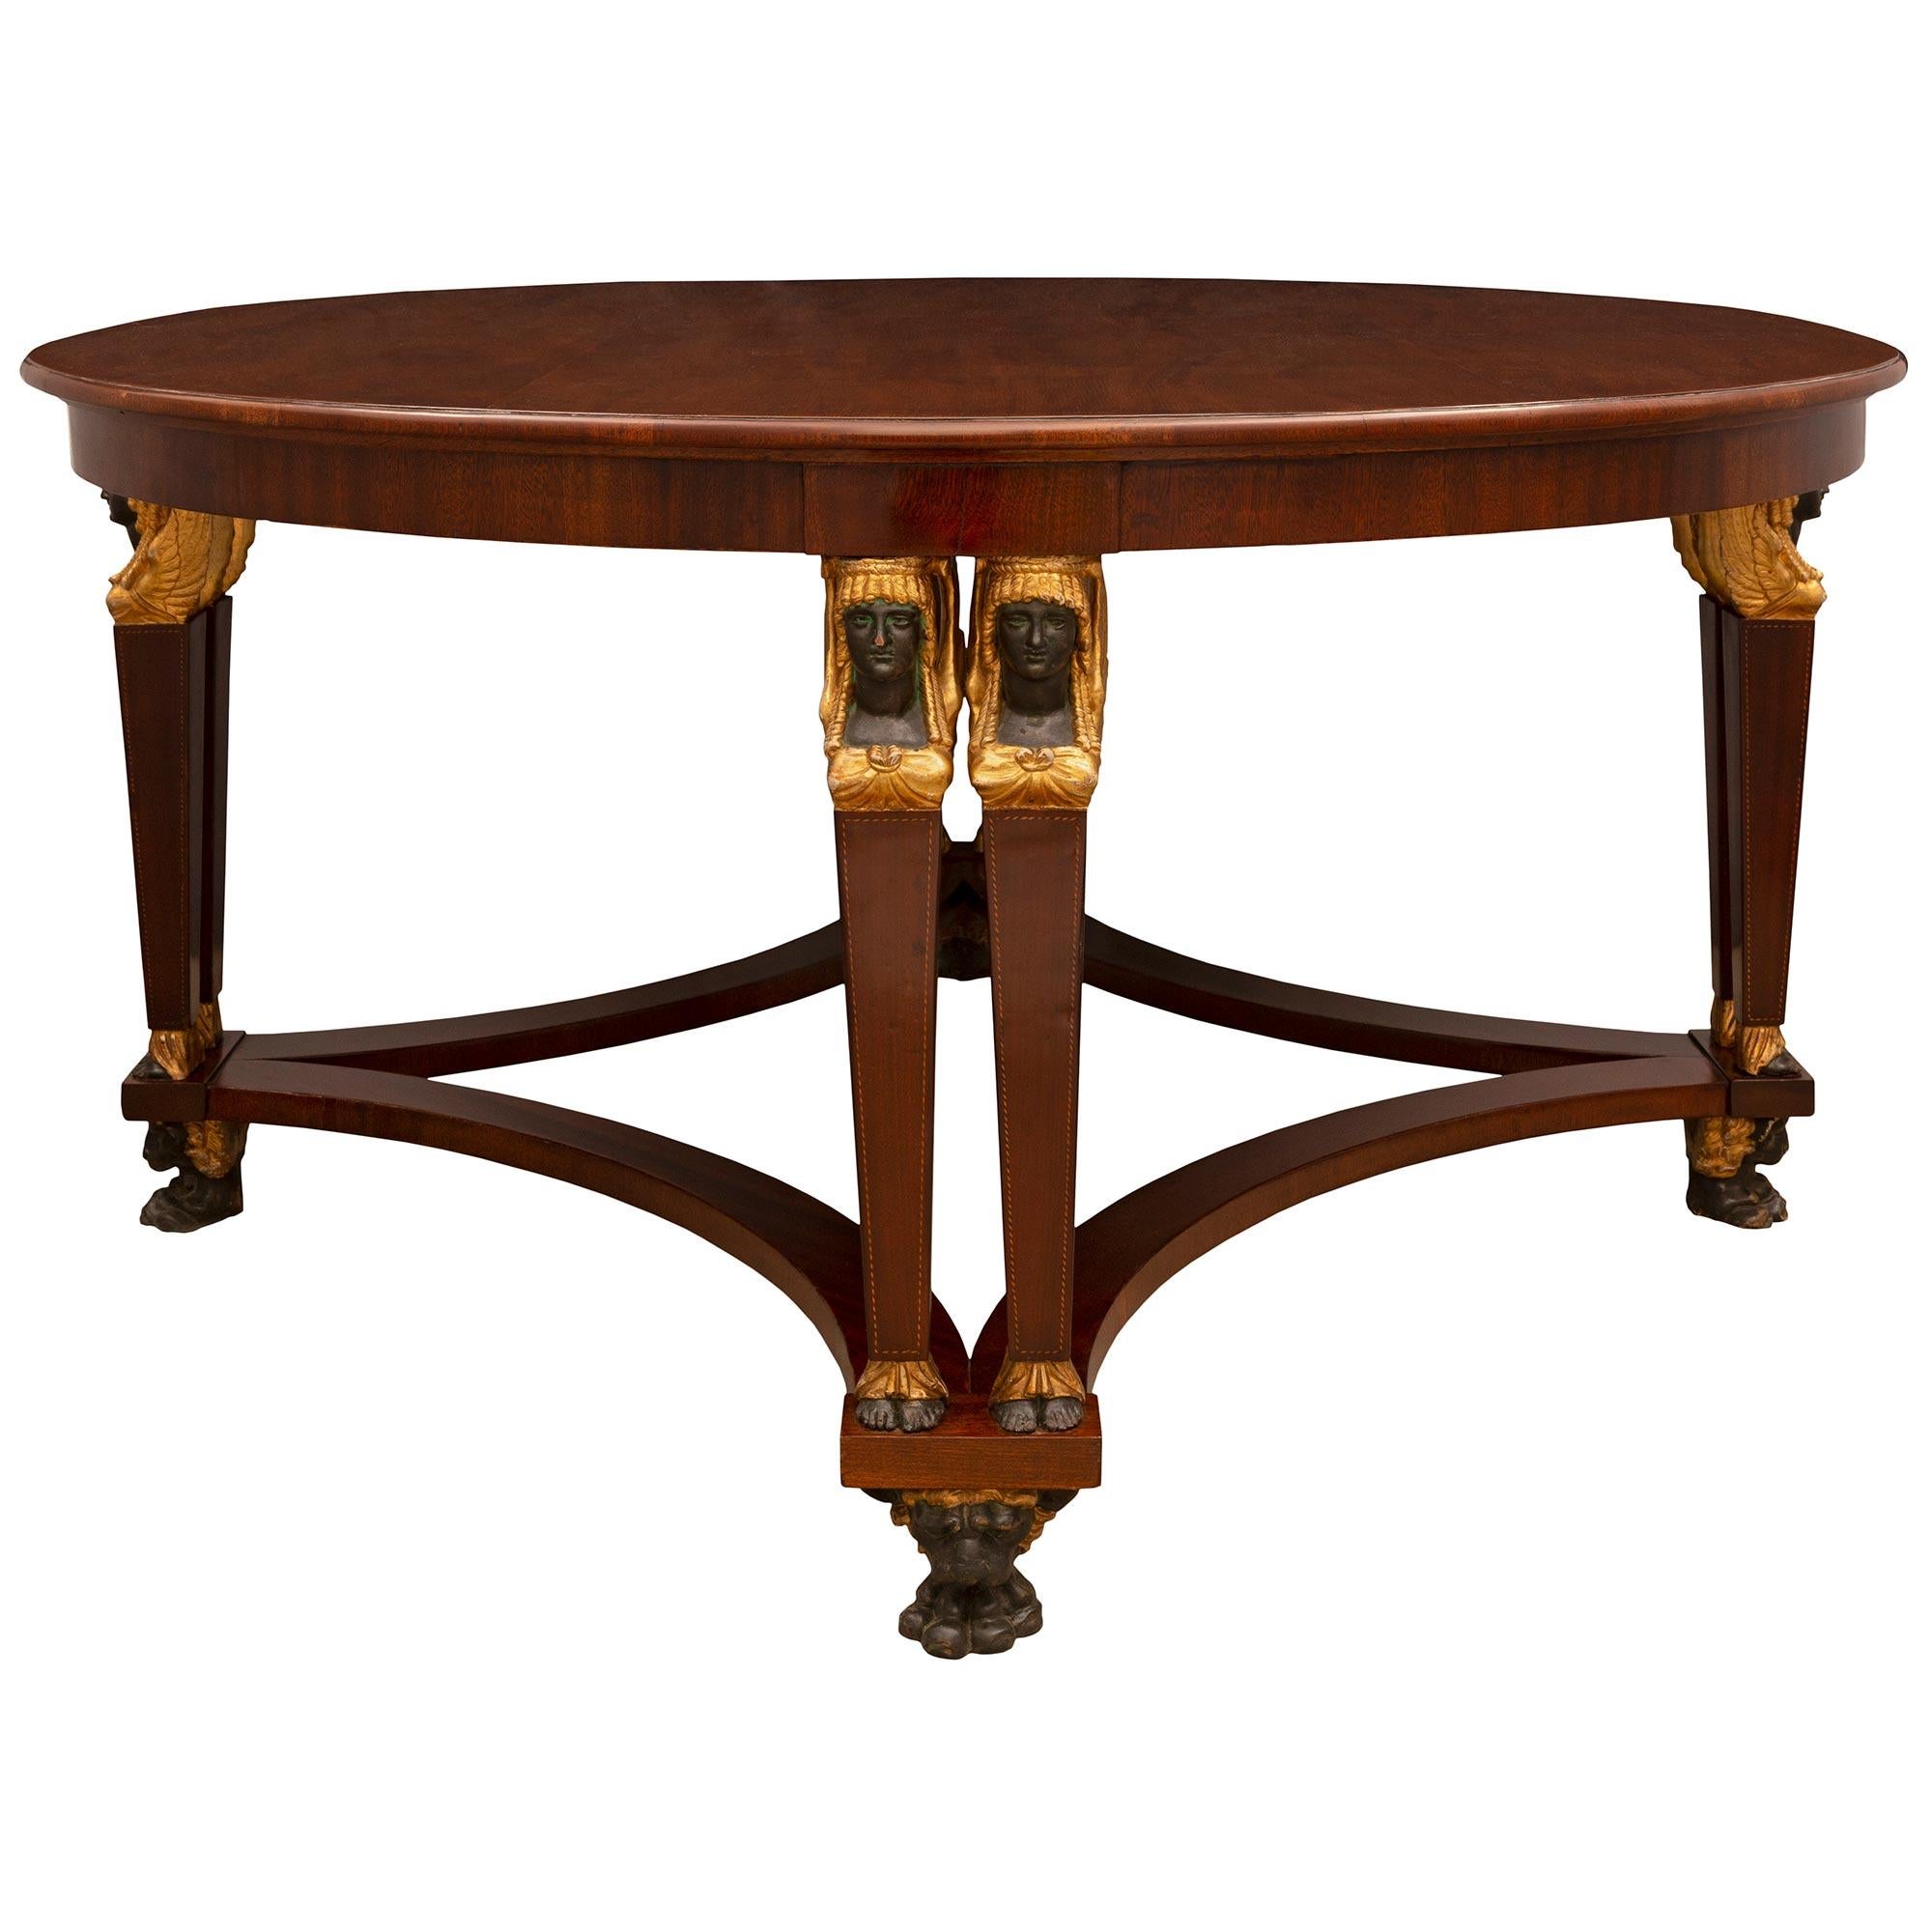 Italian 19th Century Empire St. Oval Mahogany, Gilt and Patinated Center Table In Good Condition For Sale In West Palm Beach, FL